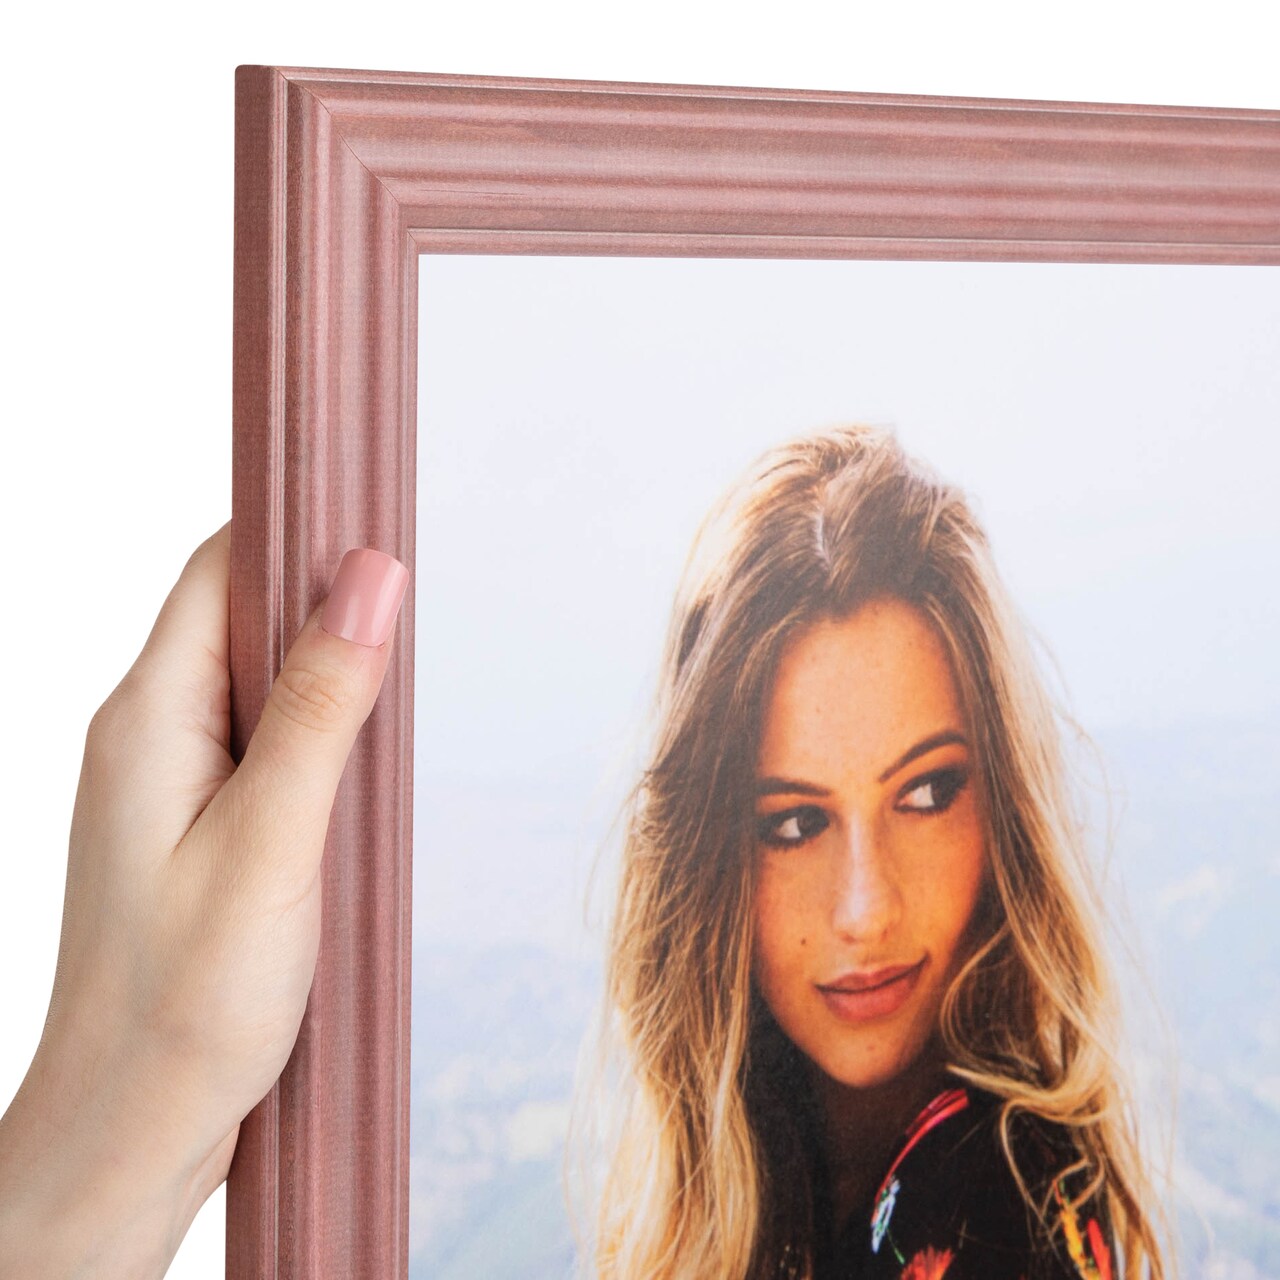 ArtToFrames 13x18 Inch  Picture Frame, This 1.5 Inch Custom Wood Poster Frame is Available in Multiple Colors, Great for Your Art or Photos - Comes with Regular Glass and  Corrugated Backing (A7JG)